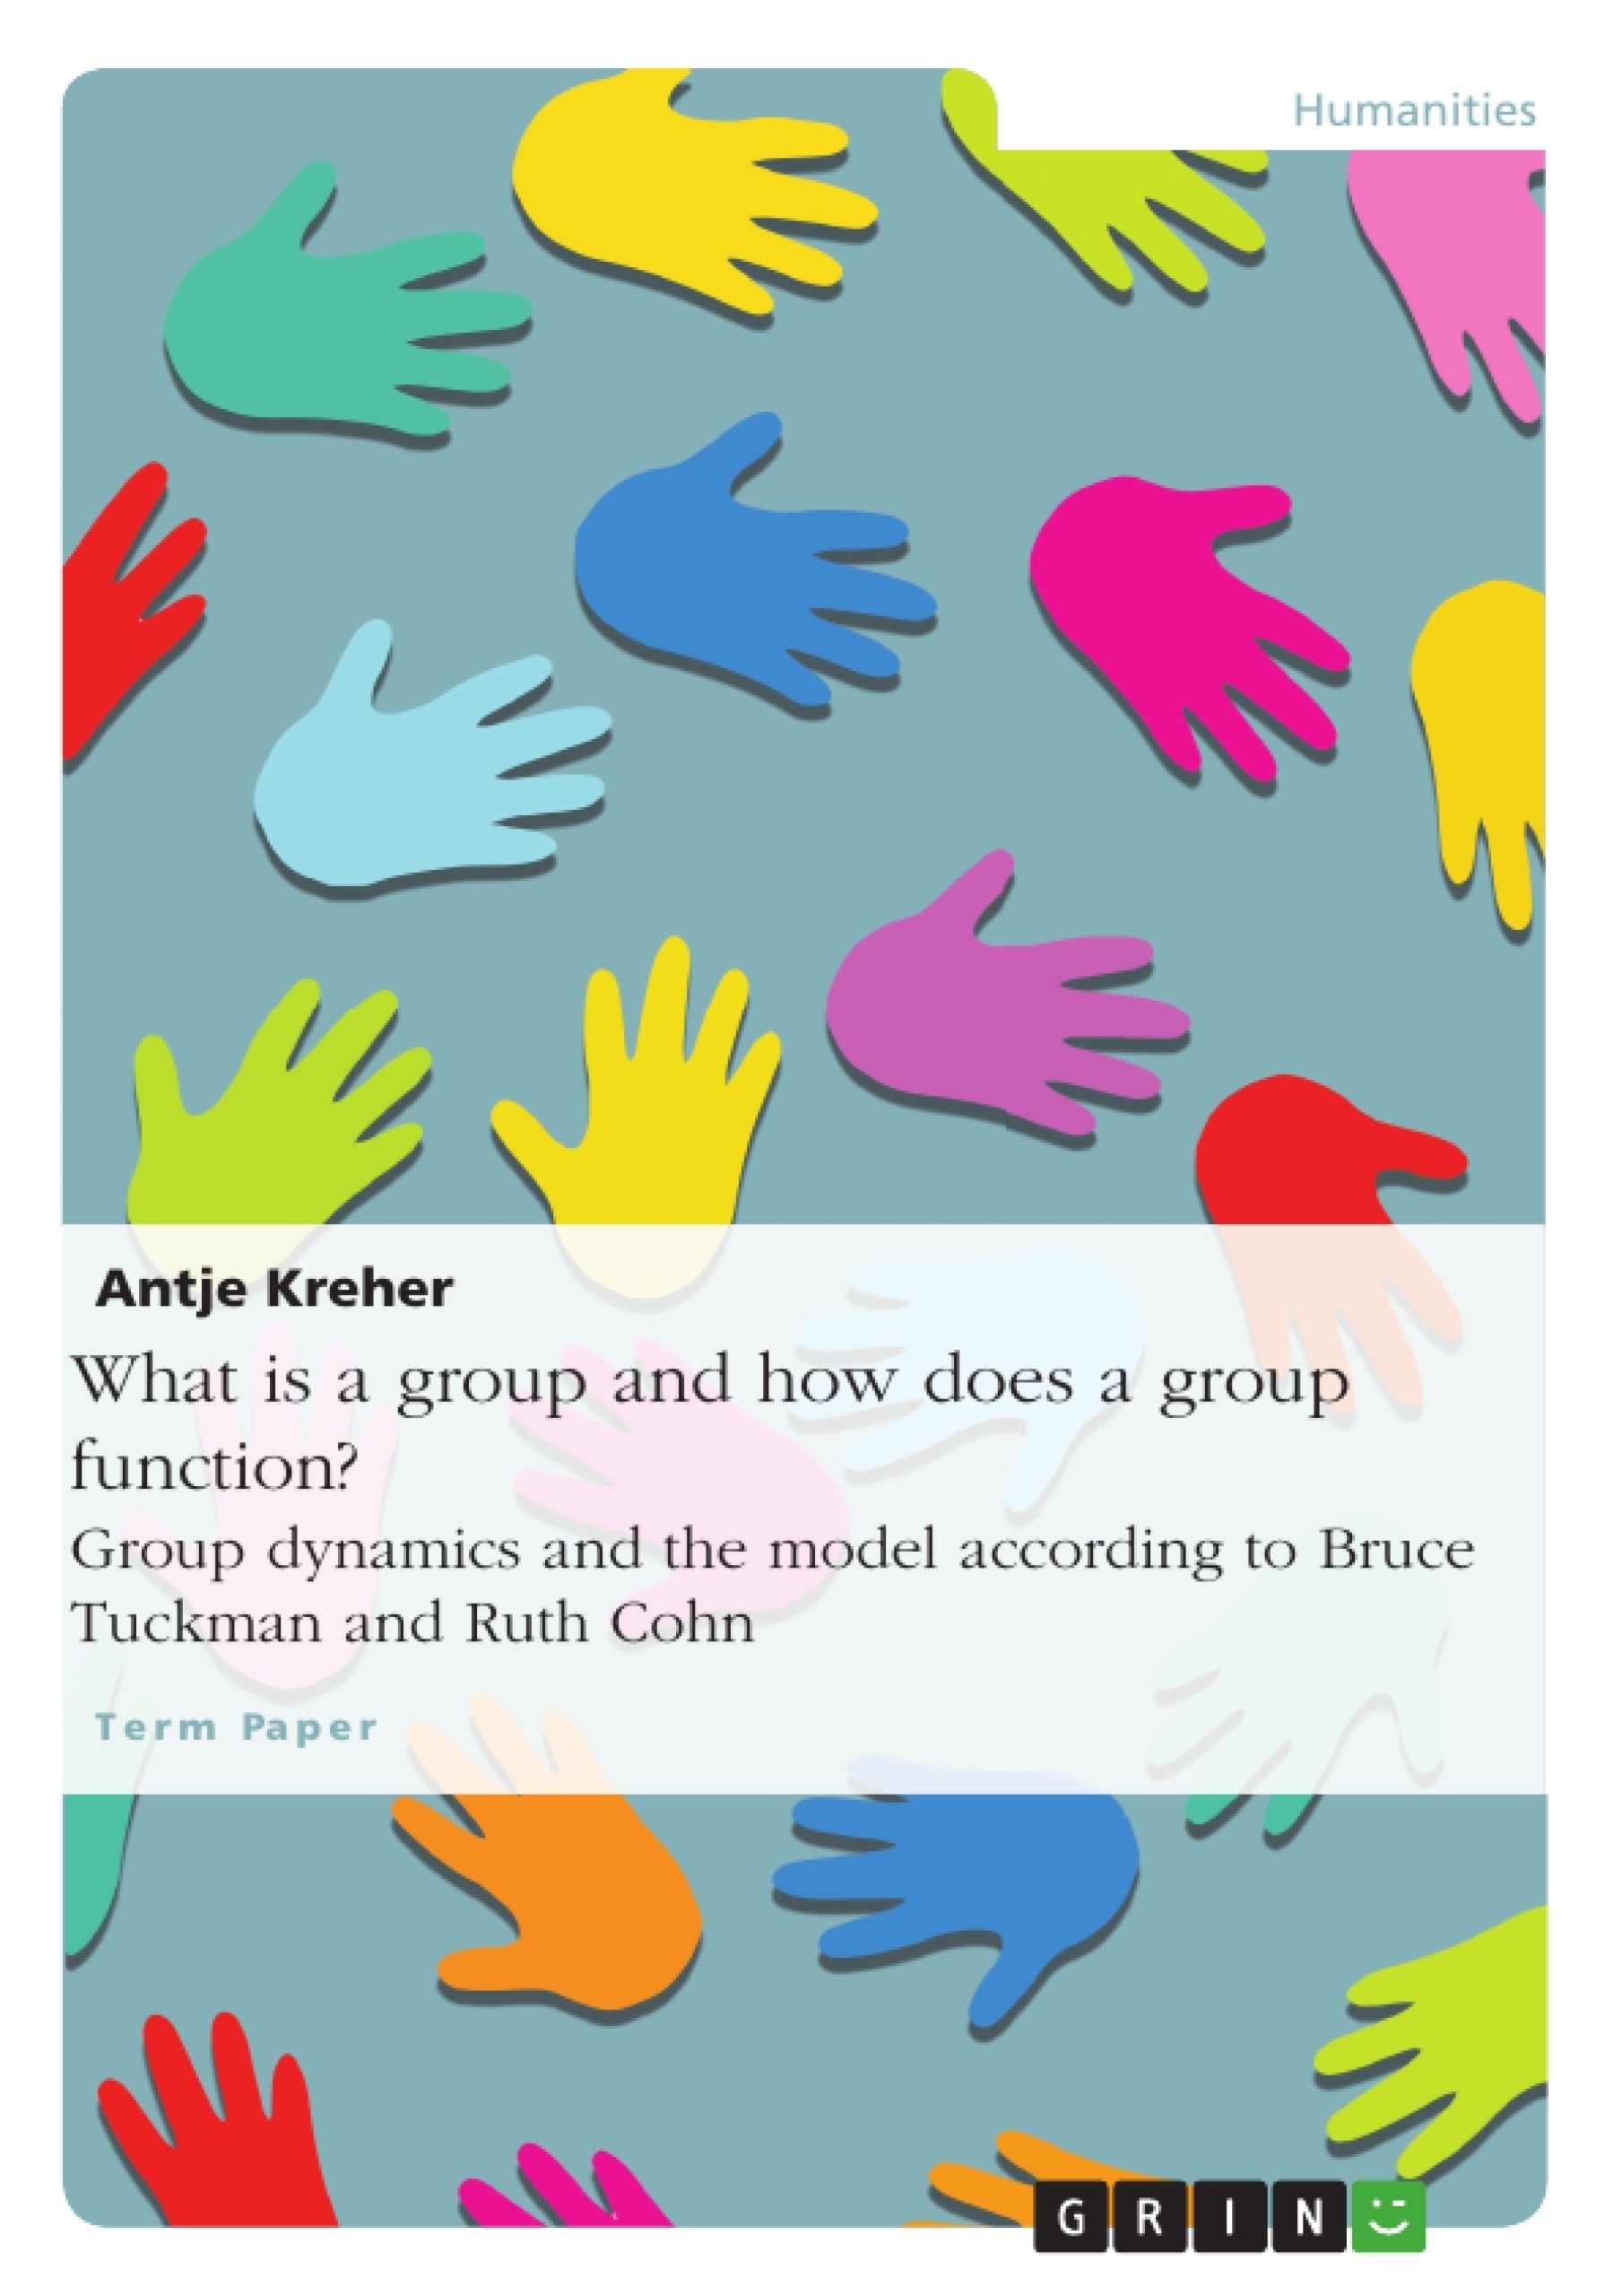 Title: What is a group and how does a group function? Group dynamics and the model according to Bruce Tuckman and Ruth Cohn